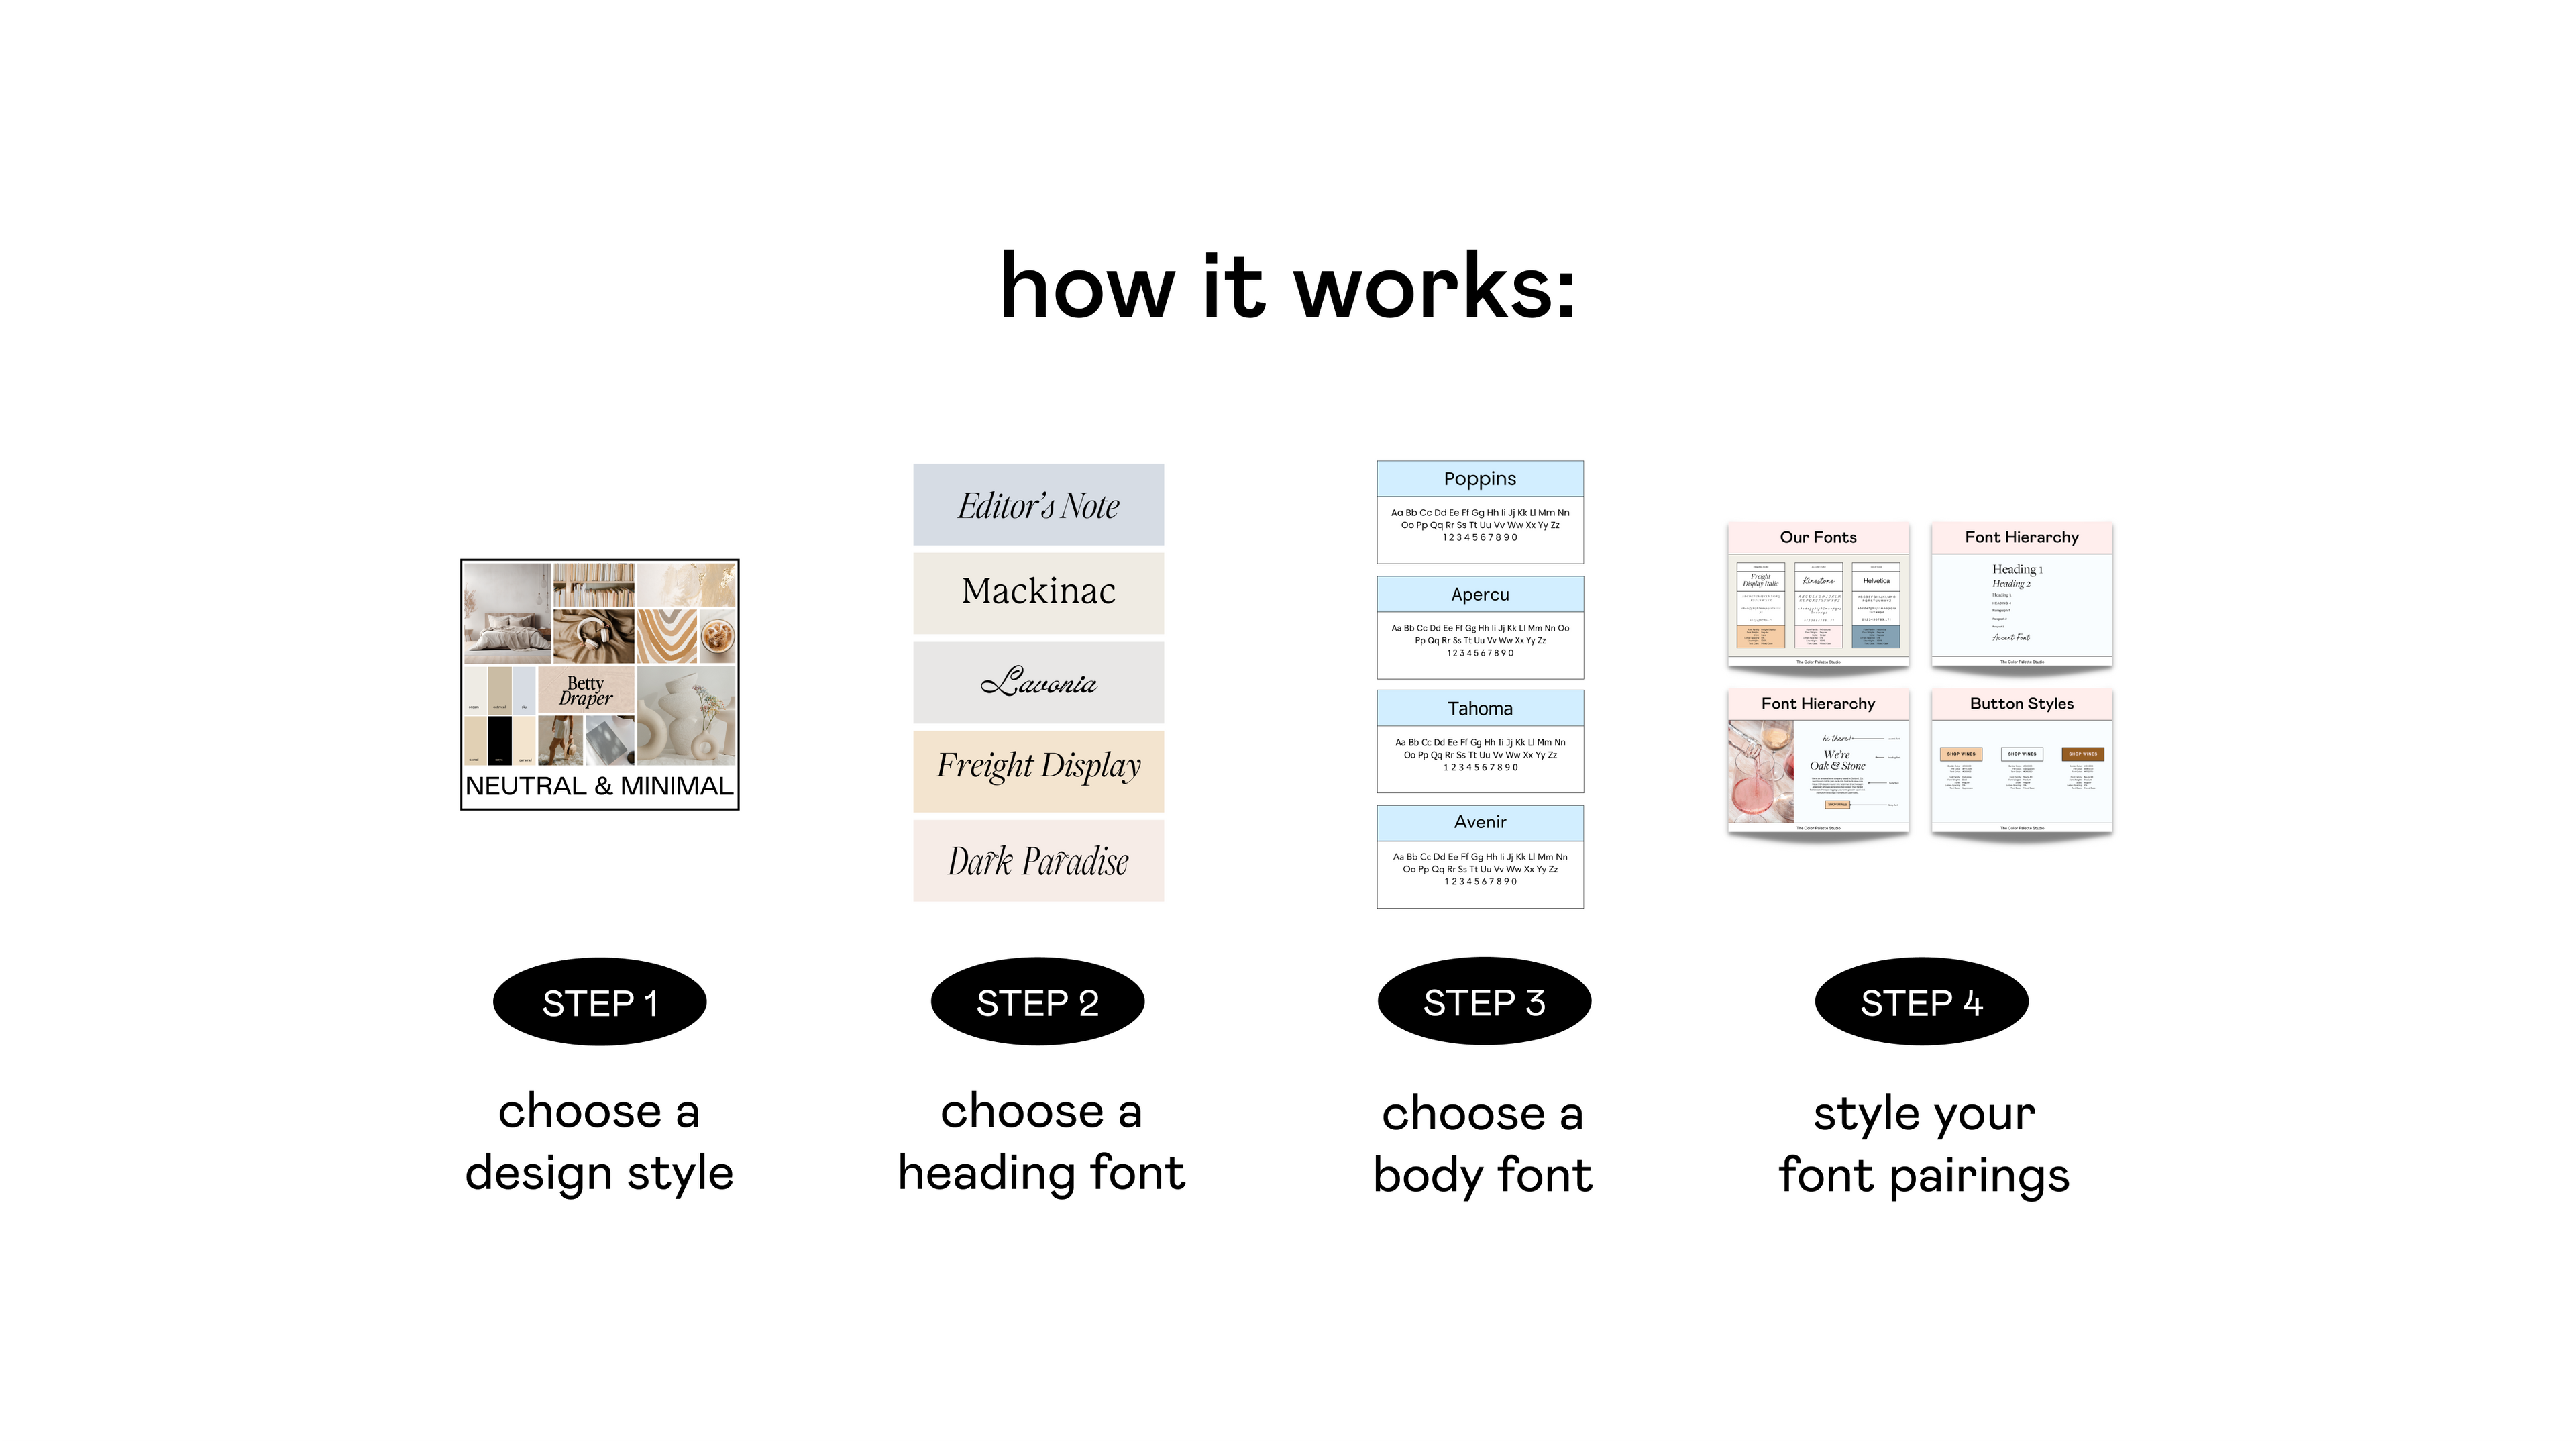 Text: "how it works" with step 1 (Choose a design Style), step 2 (choose a heading font), step 3 (choose a body font) and step 4 (style your font pairings)